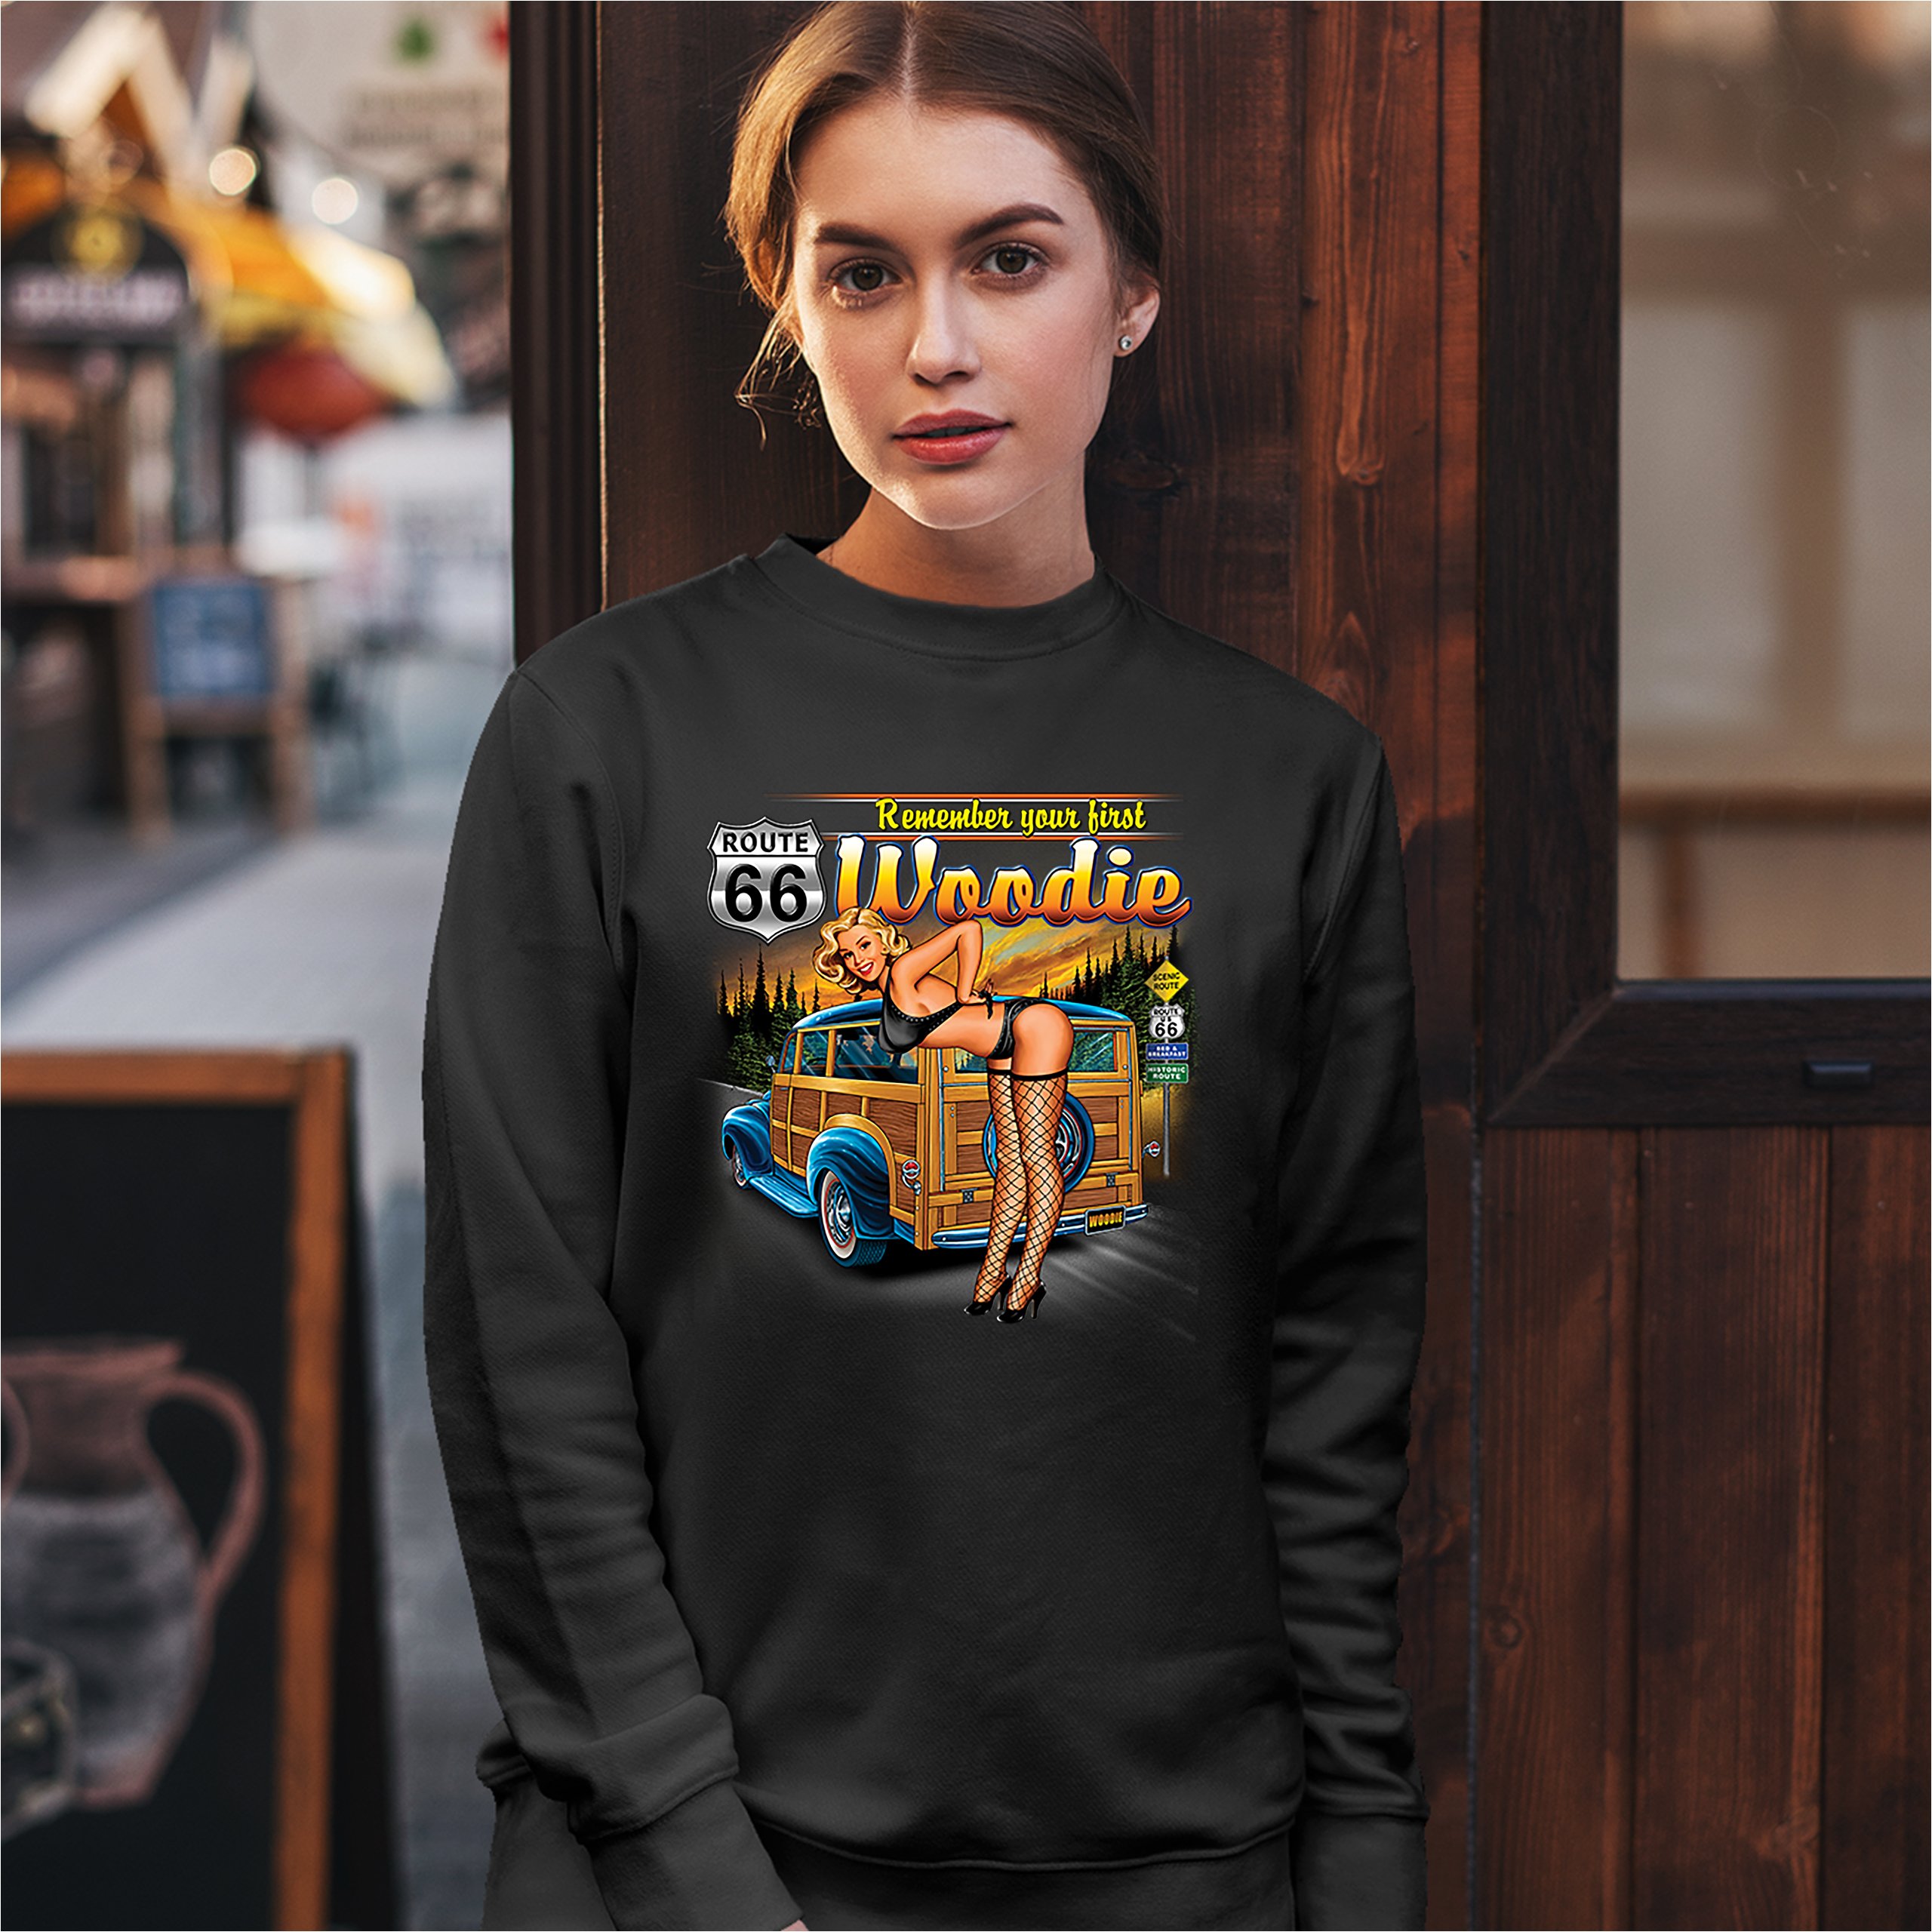 Remember Your First Woodie Sweatshirt Route 66 Sexy Pin-up Girl ...